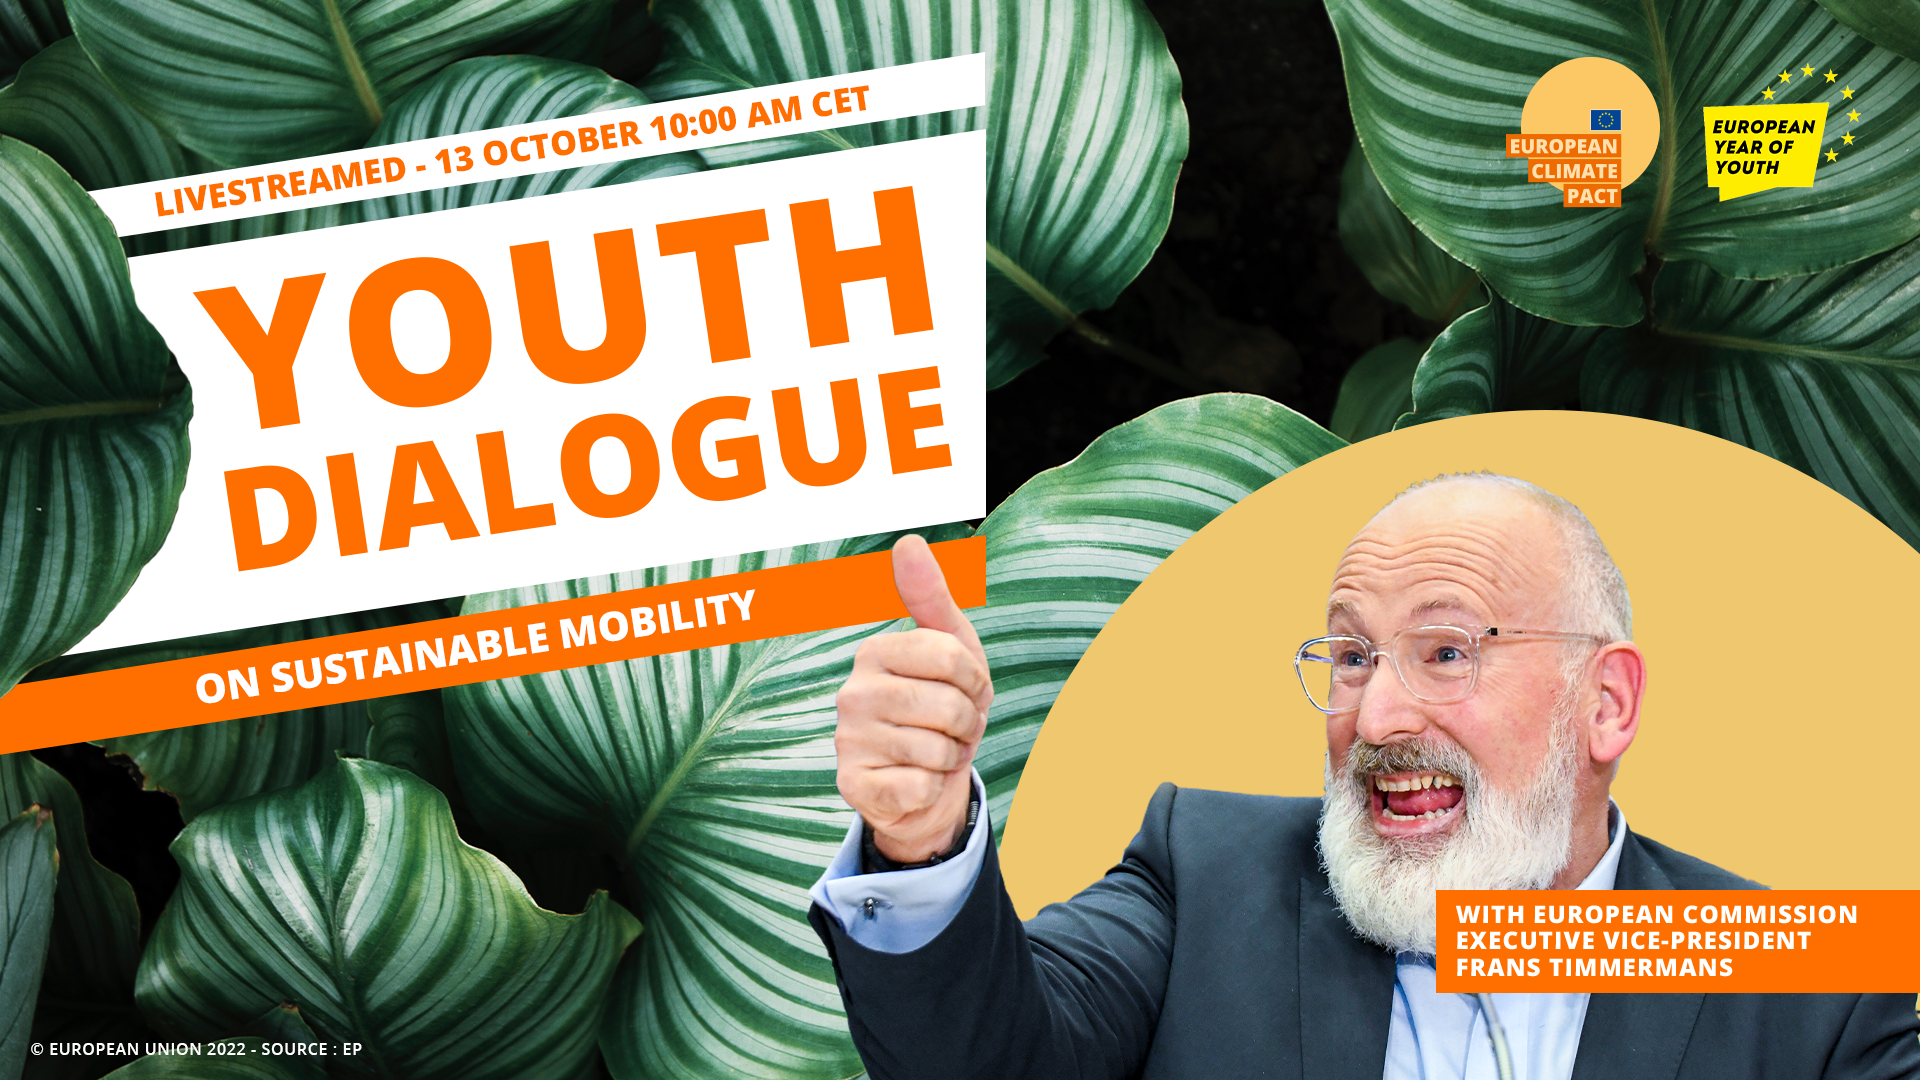 Youth Climate Pact Dialogue